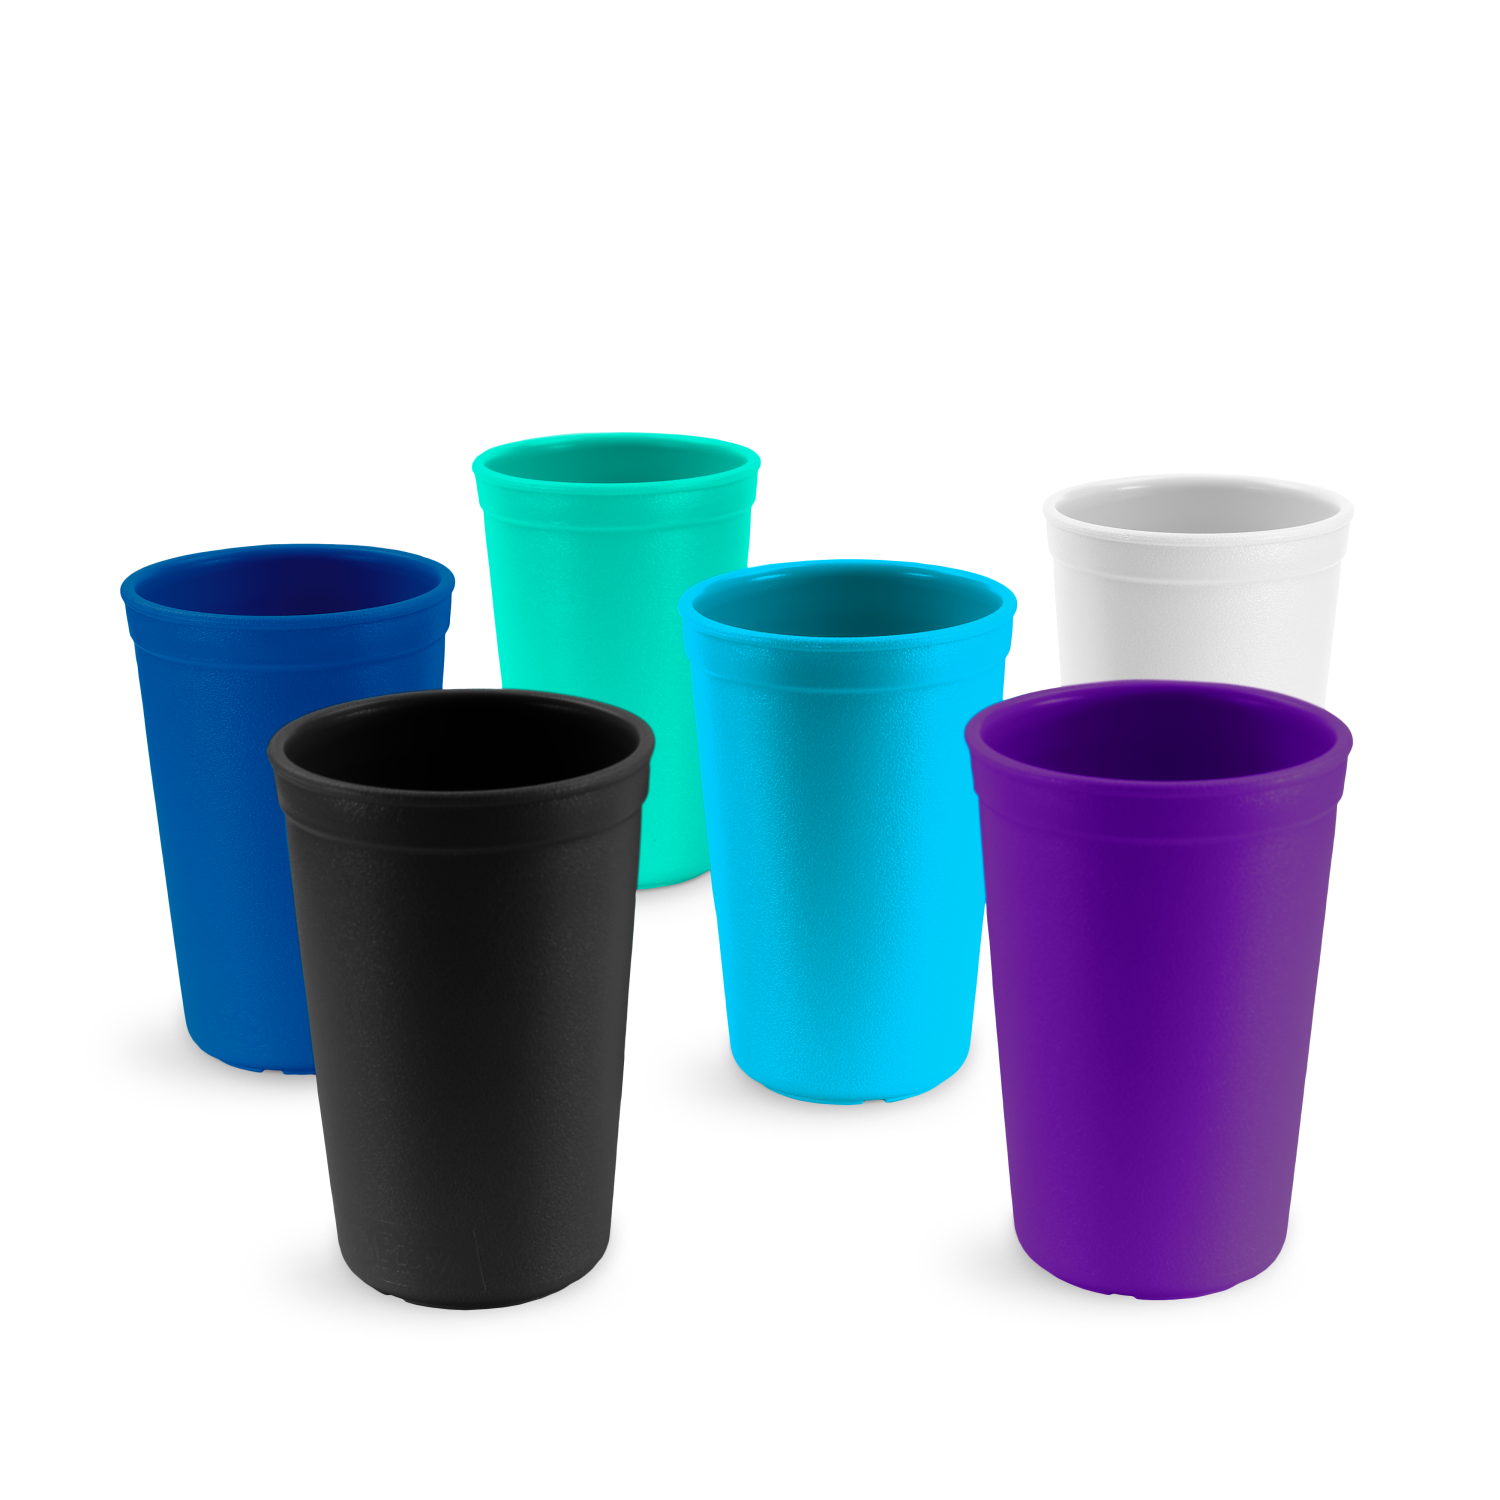 Re-Play Made in The USA 4pk No Spill Sippy Cups for Baby, Toddler, and  Child Feeding - Sky Blue, Aqua, Navy, Teal (True Blue+) 